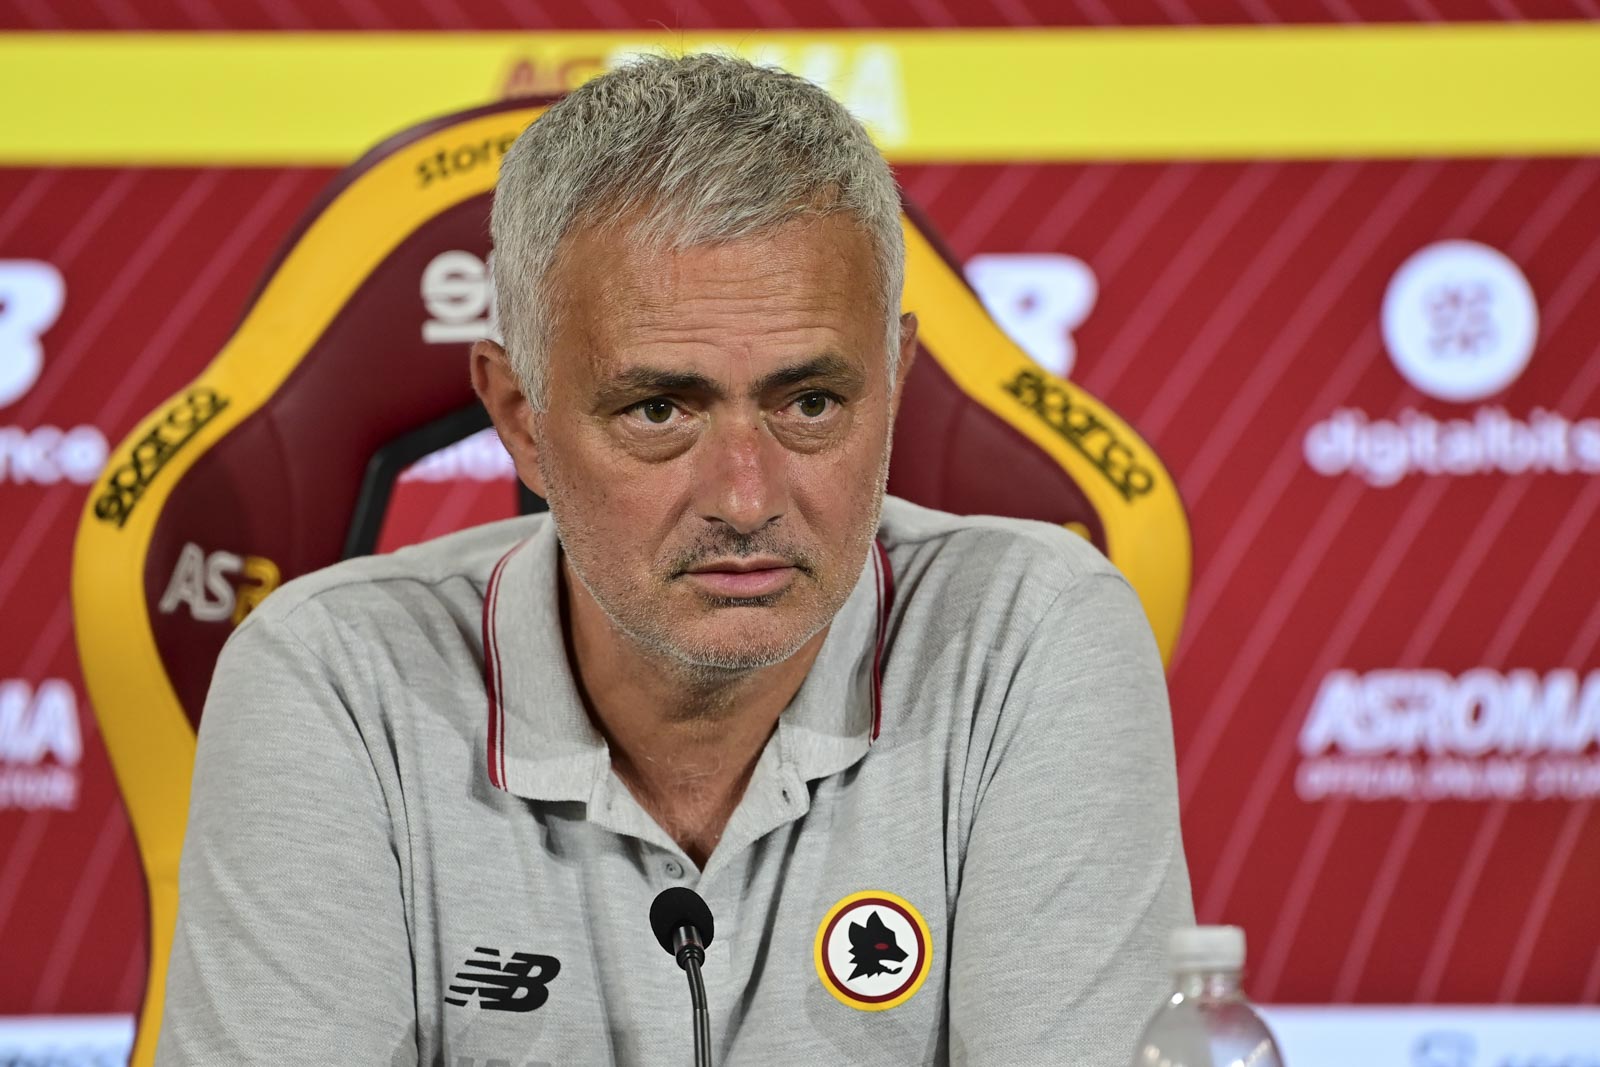 Jose Mourinho has transformed AS Roma into the Brazil of 1970 right before our very eyes